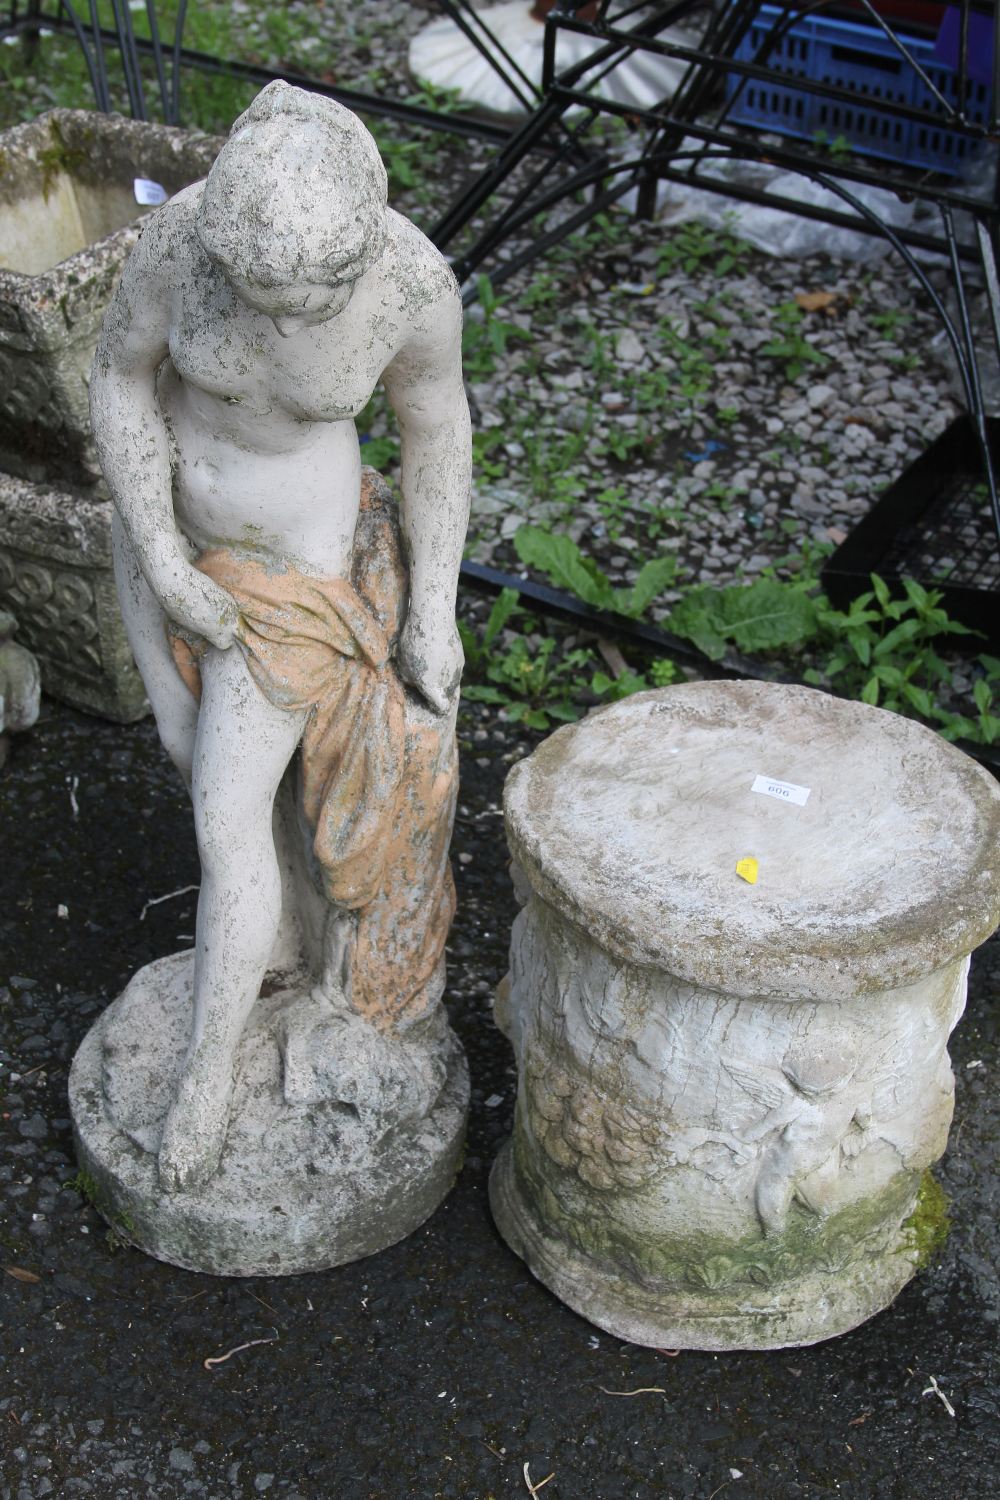 A CHERUBIC DESIGN STONE PLINTH TOGETHER WITH A STONE NUDE FEMALE FIGURE